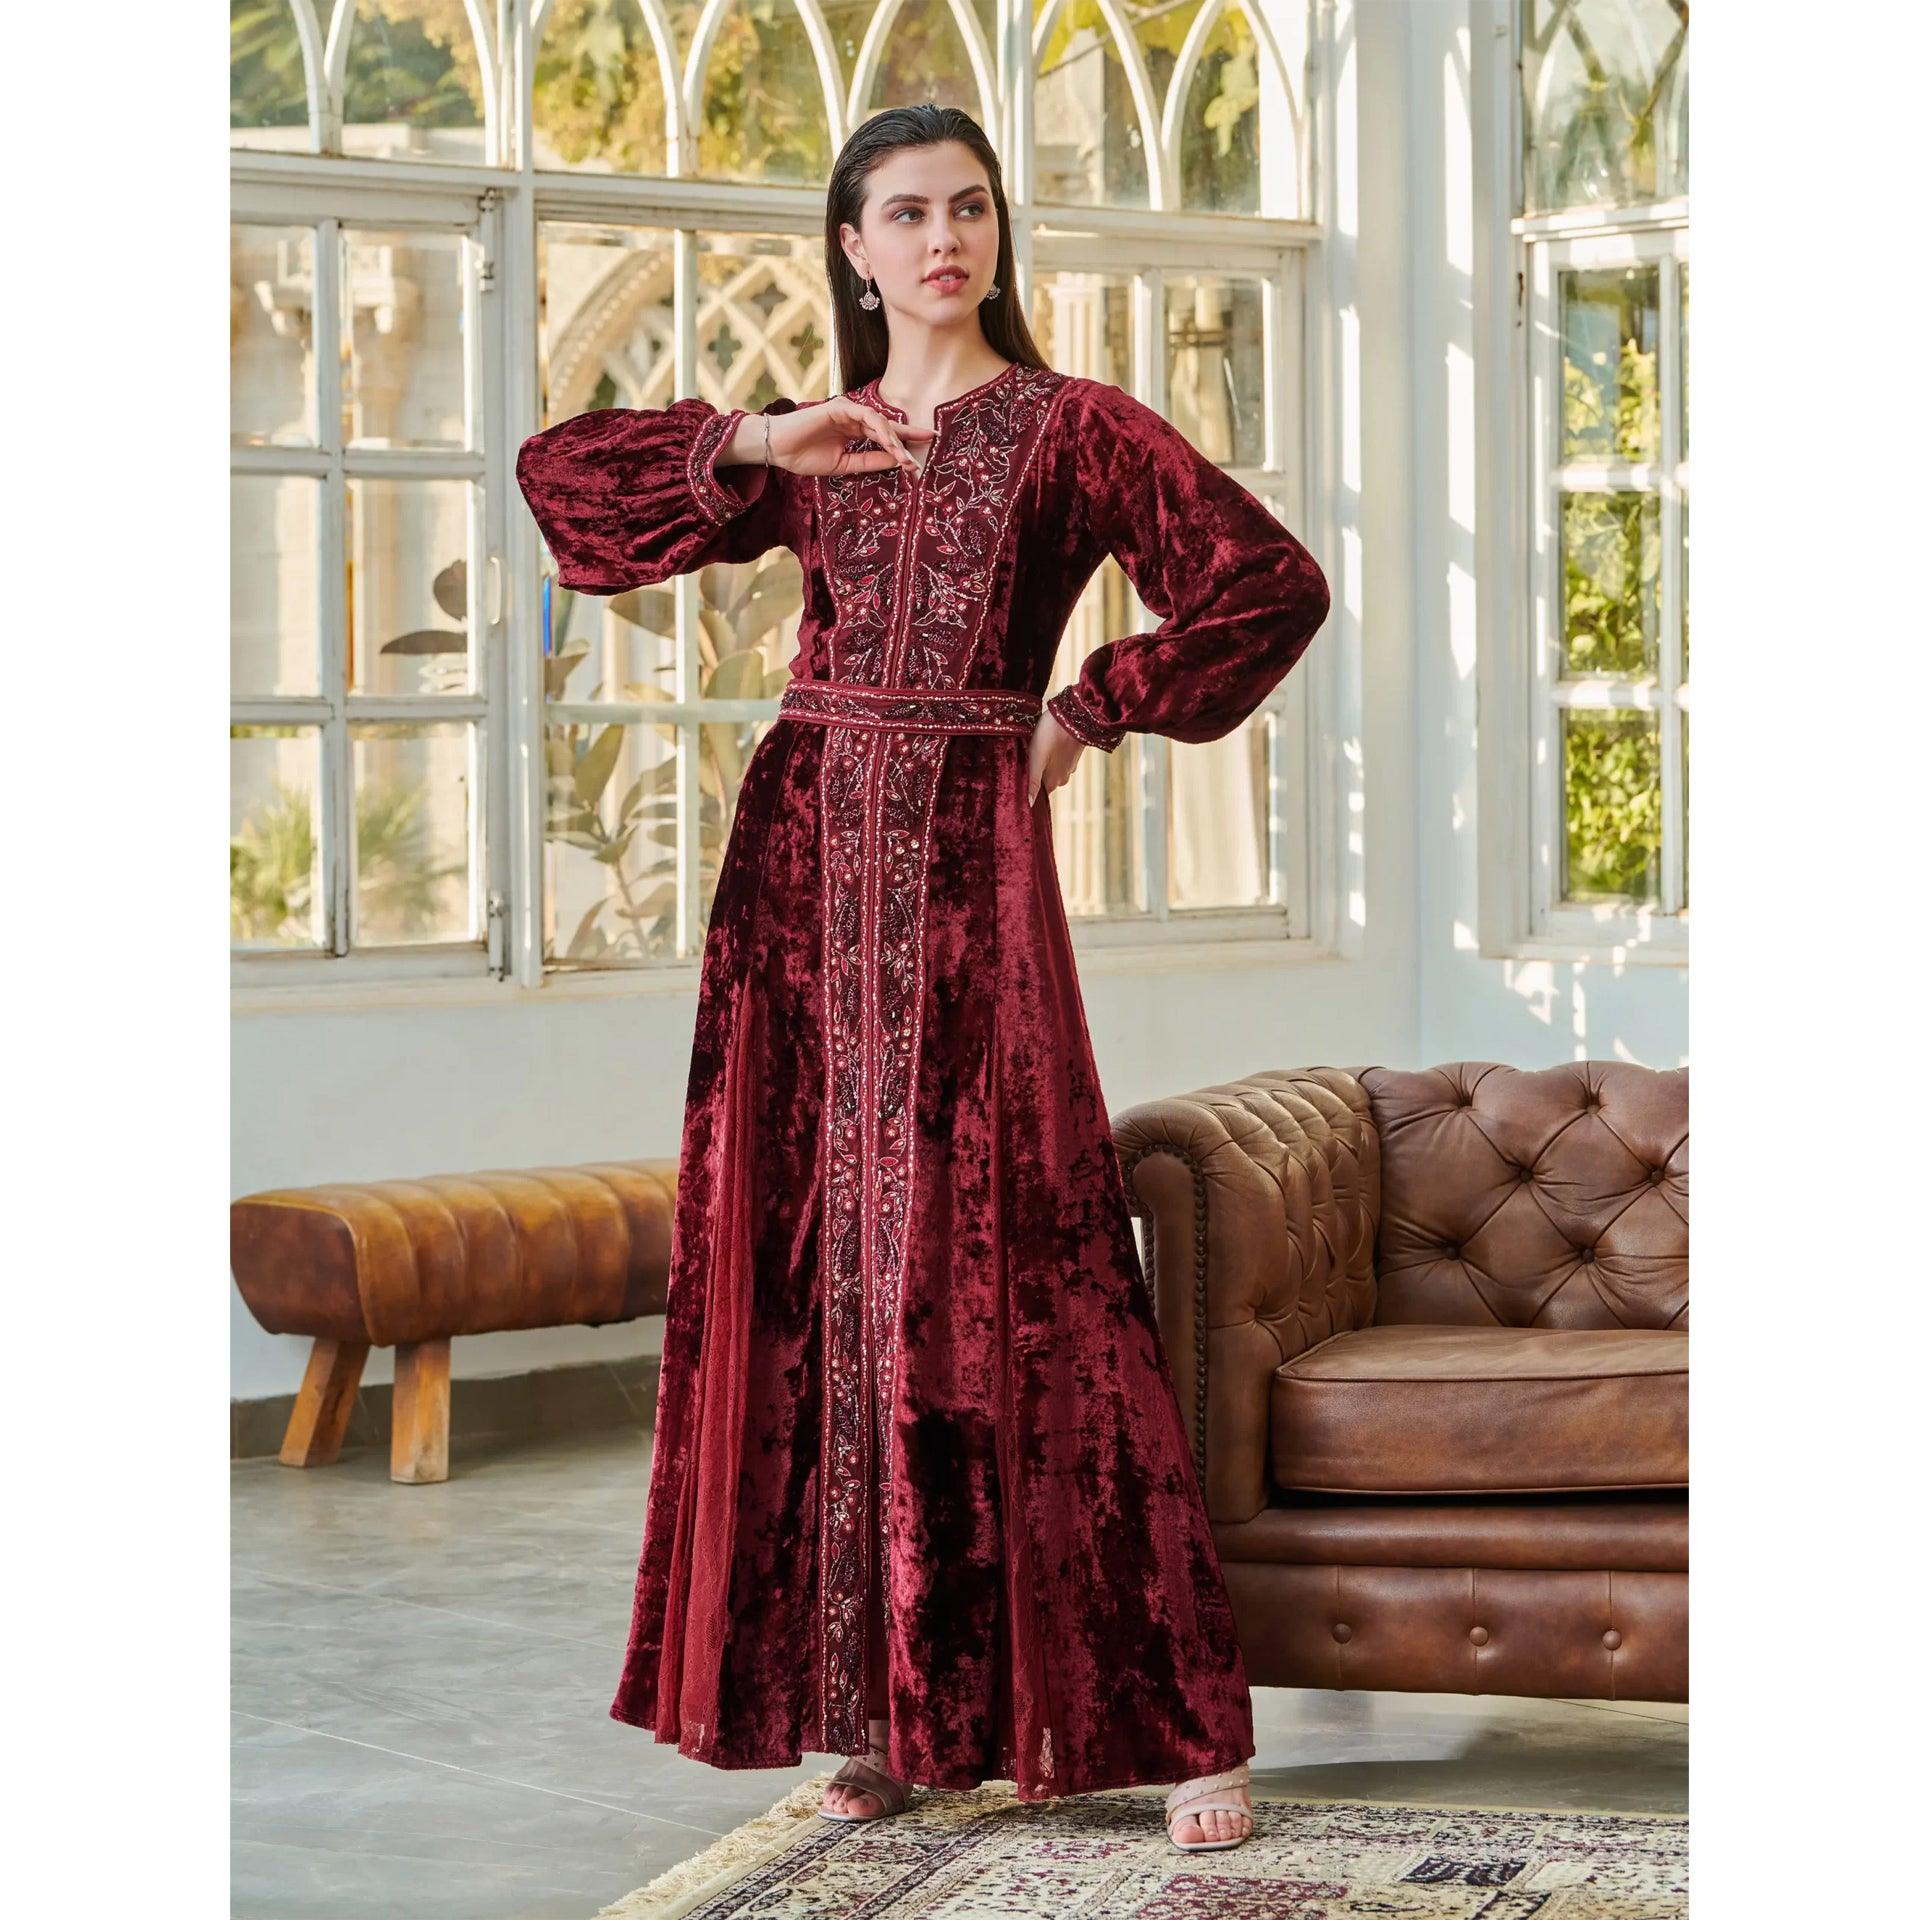 Brown Velvet Nolaya Dress With Long Sleeves And Gold Embroidery From Shalky - WECRE8